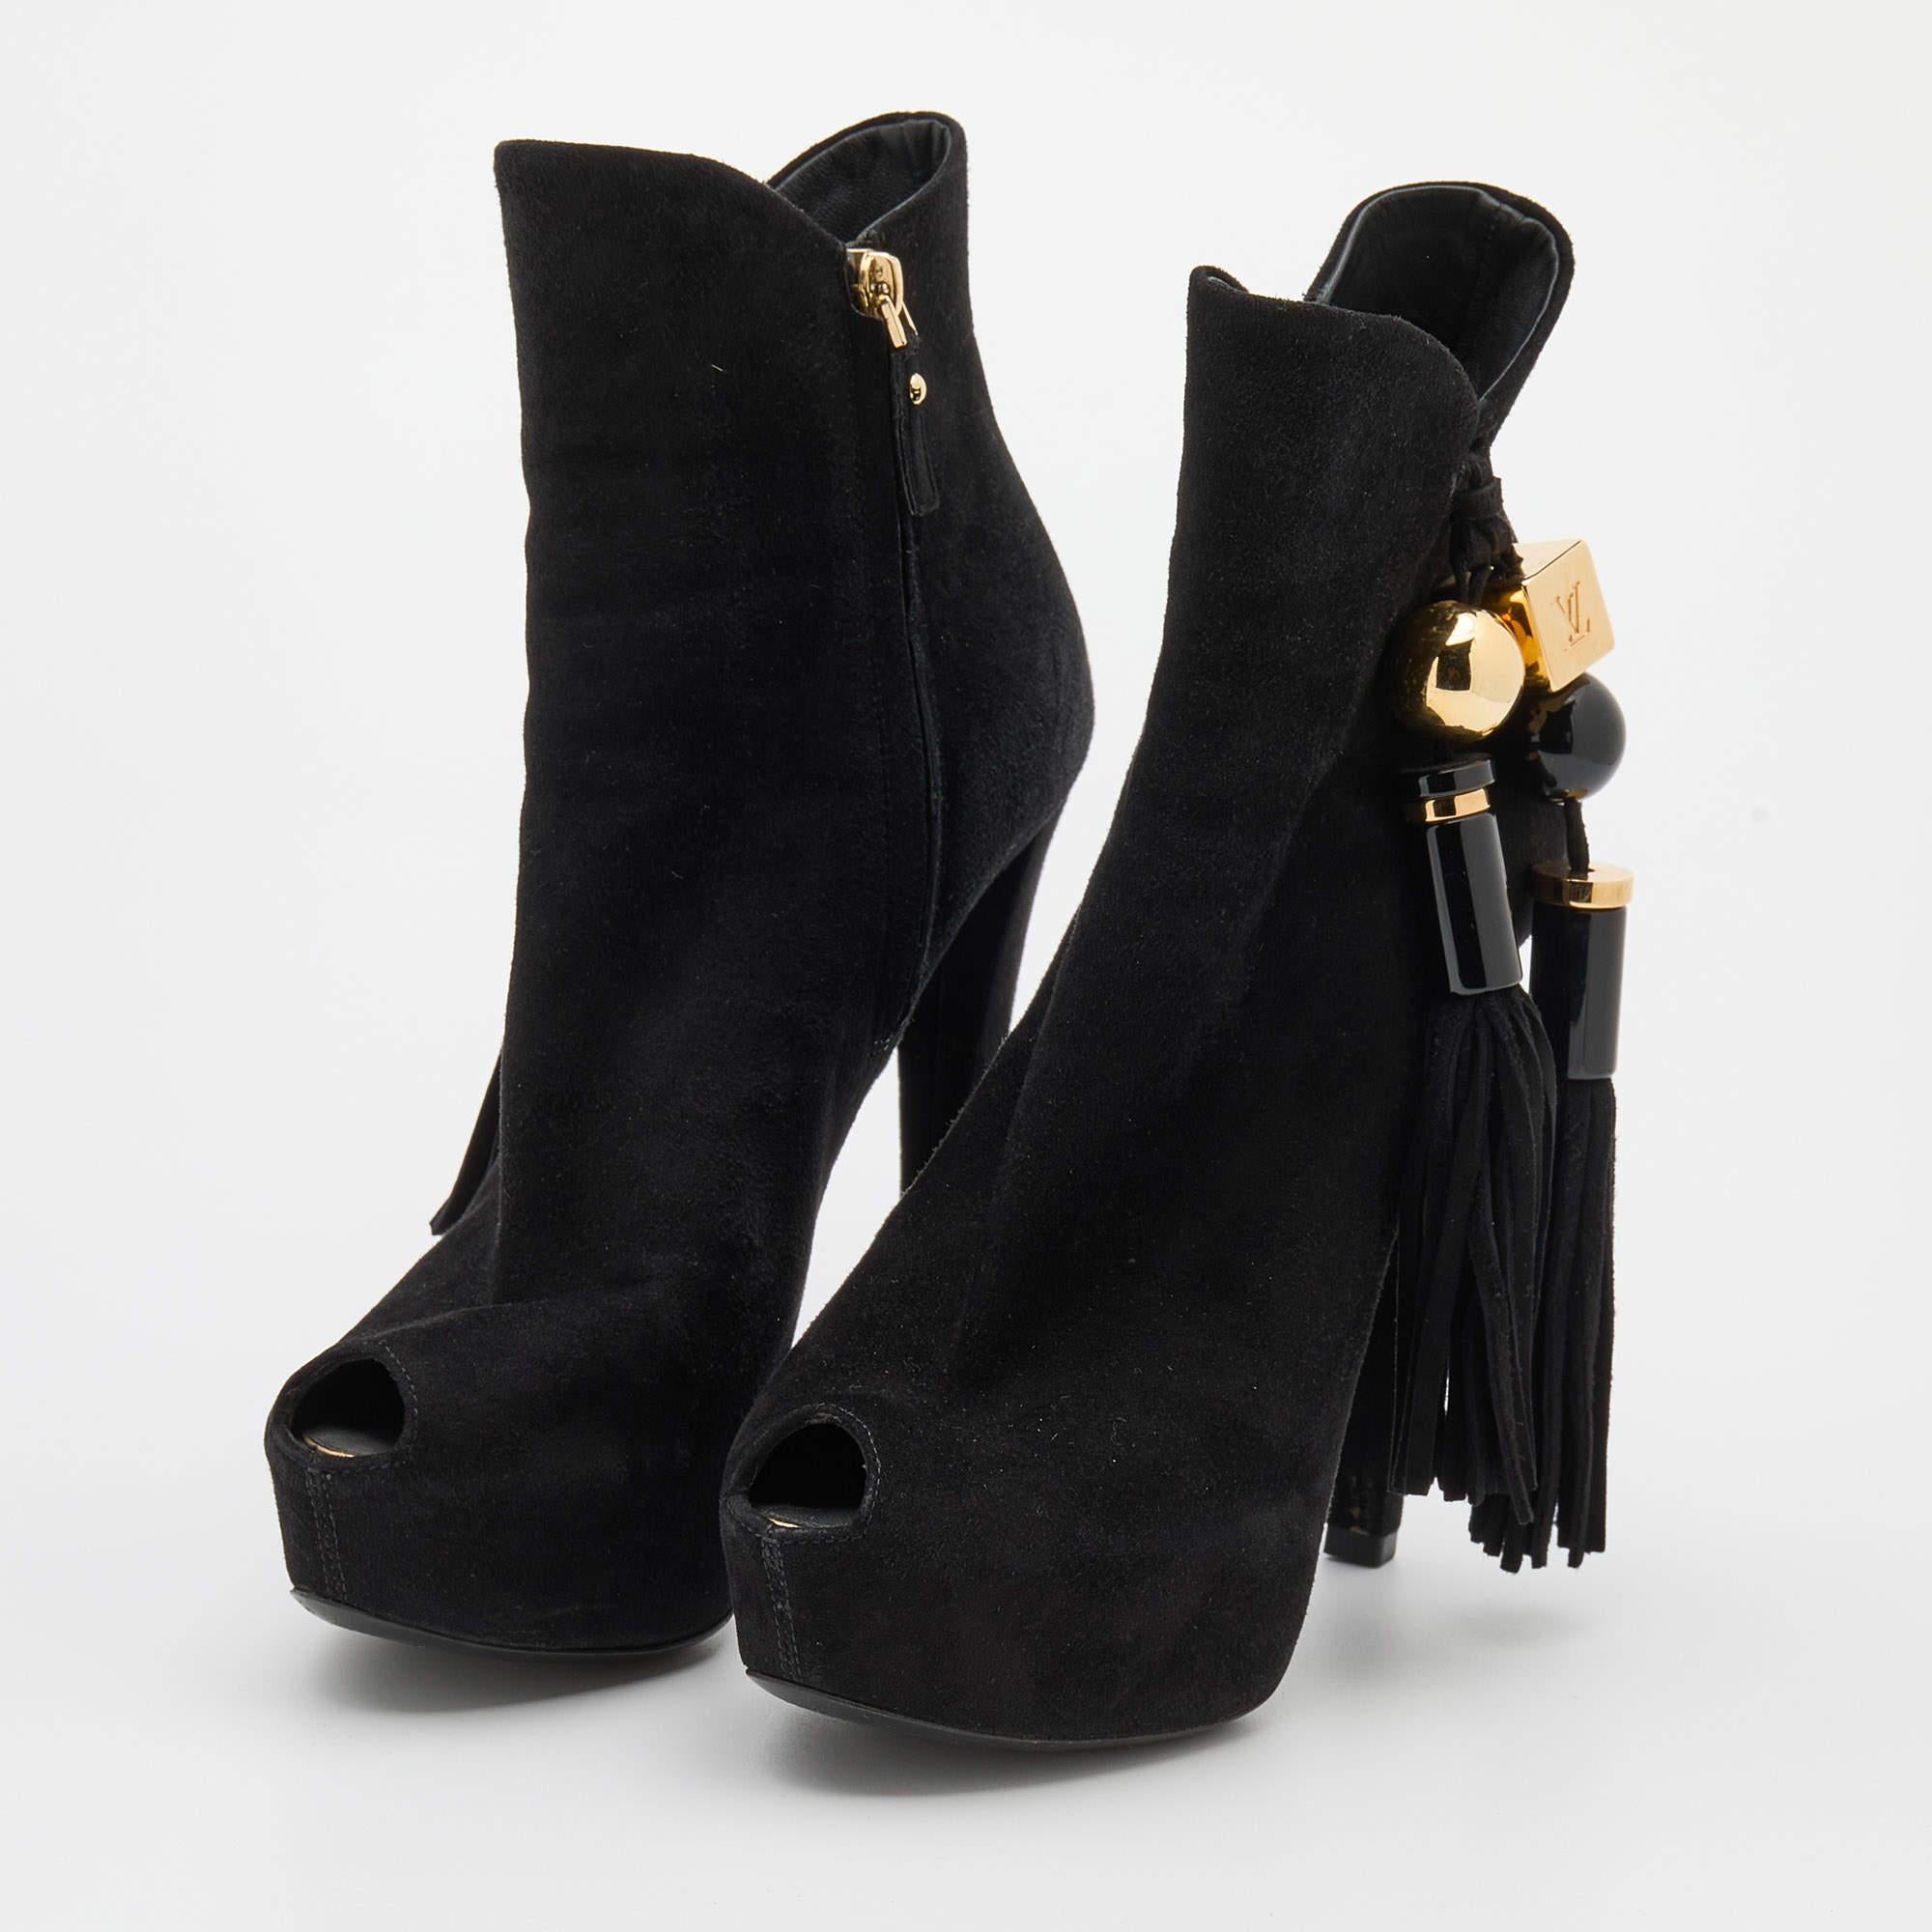 Louis Vuitton is all set to impress you with this stunning pair of booties. Crafted from suede, they feature peep toes. This pair of booties will raise your style factor.

